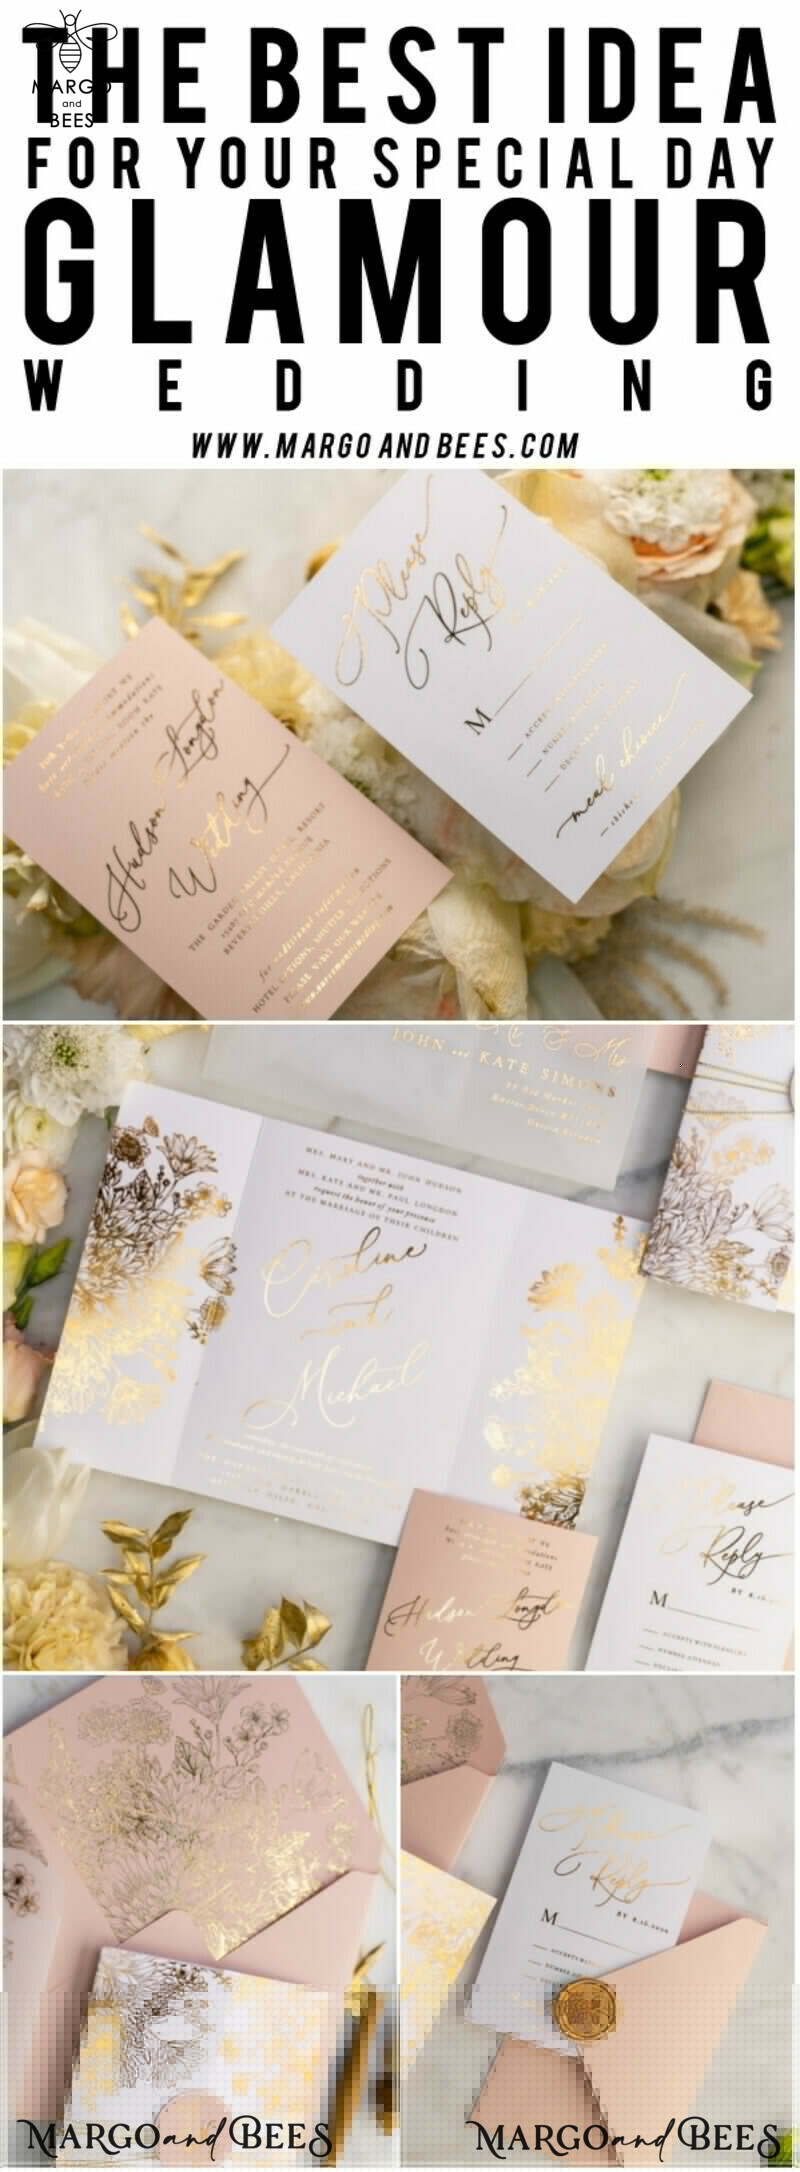 Exquisite Arabic Golden Wedding Invitations with Glamour Gold Foil and Romantic Blush Pink Touches: Bespoke Indian Wedding Stationery-45